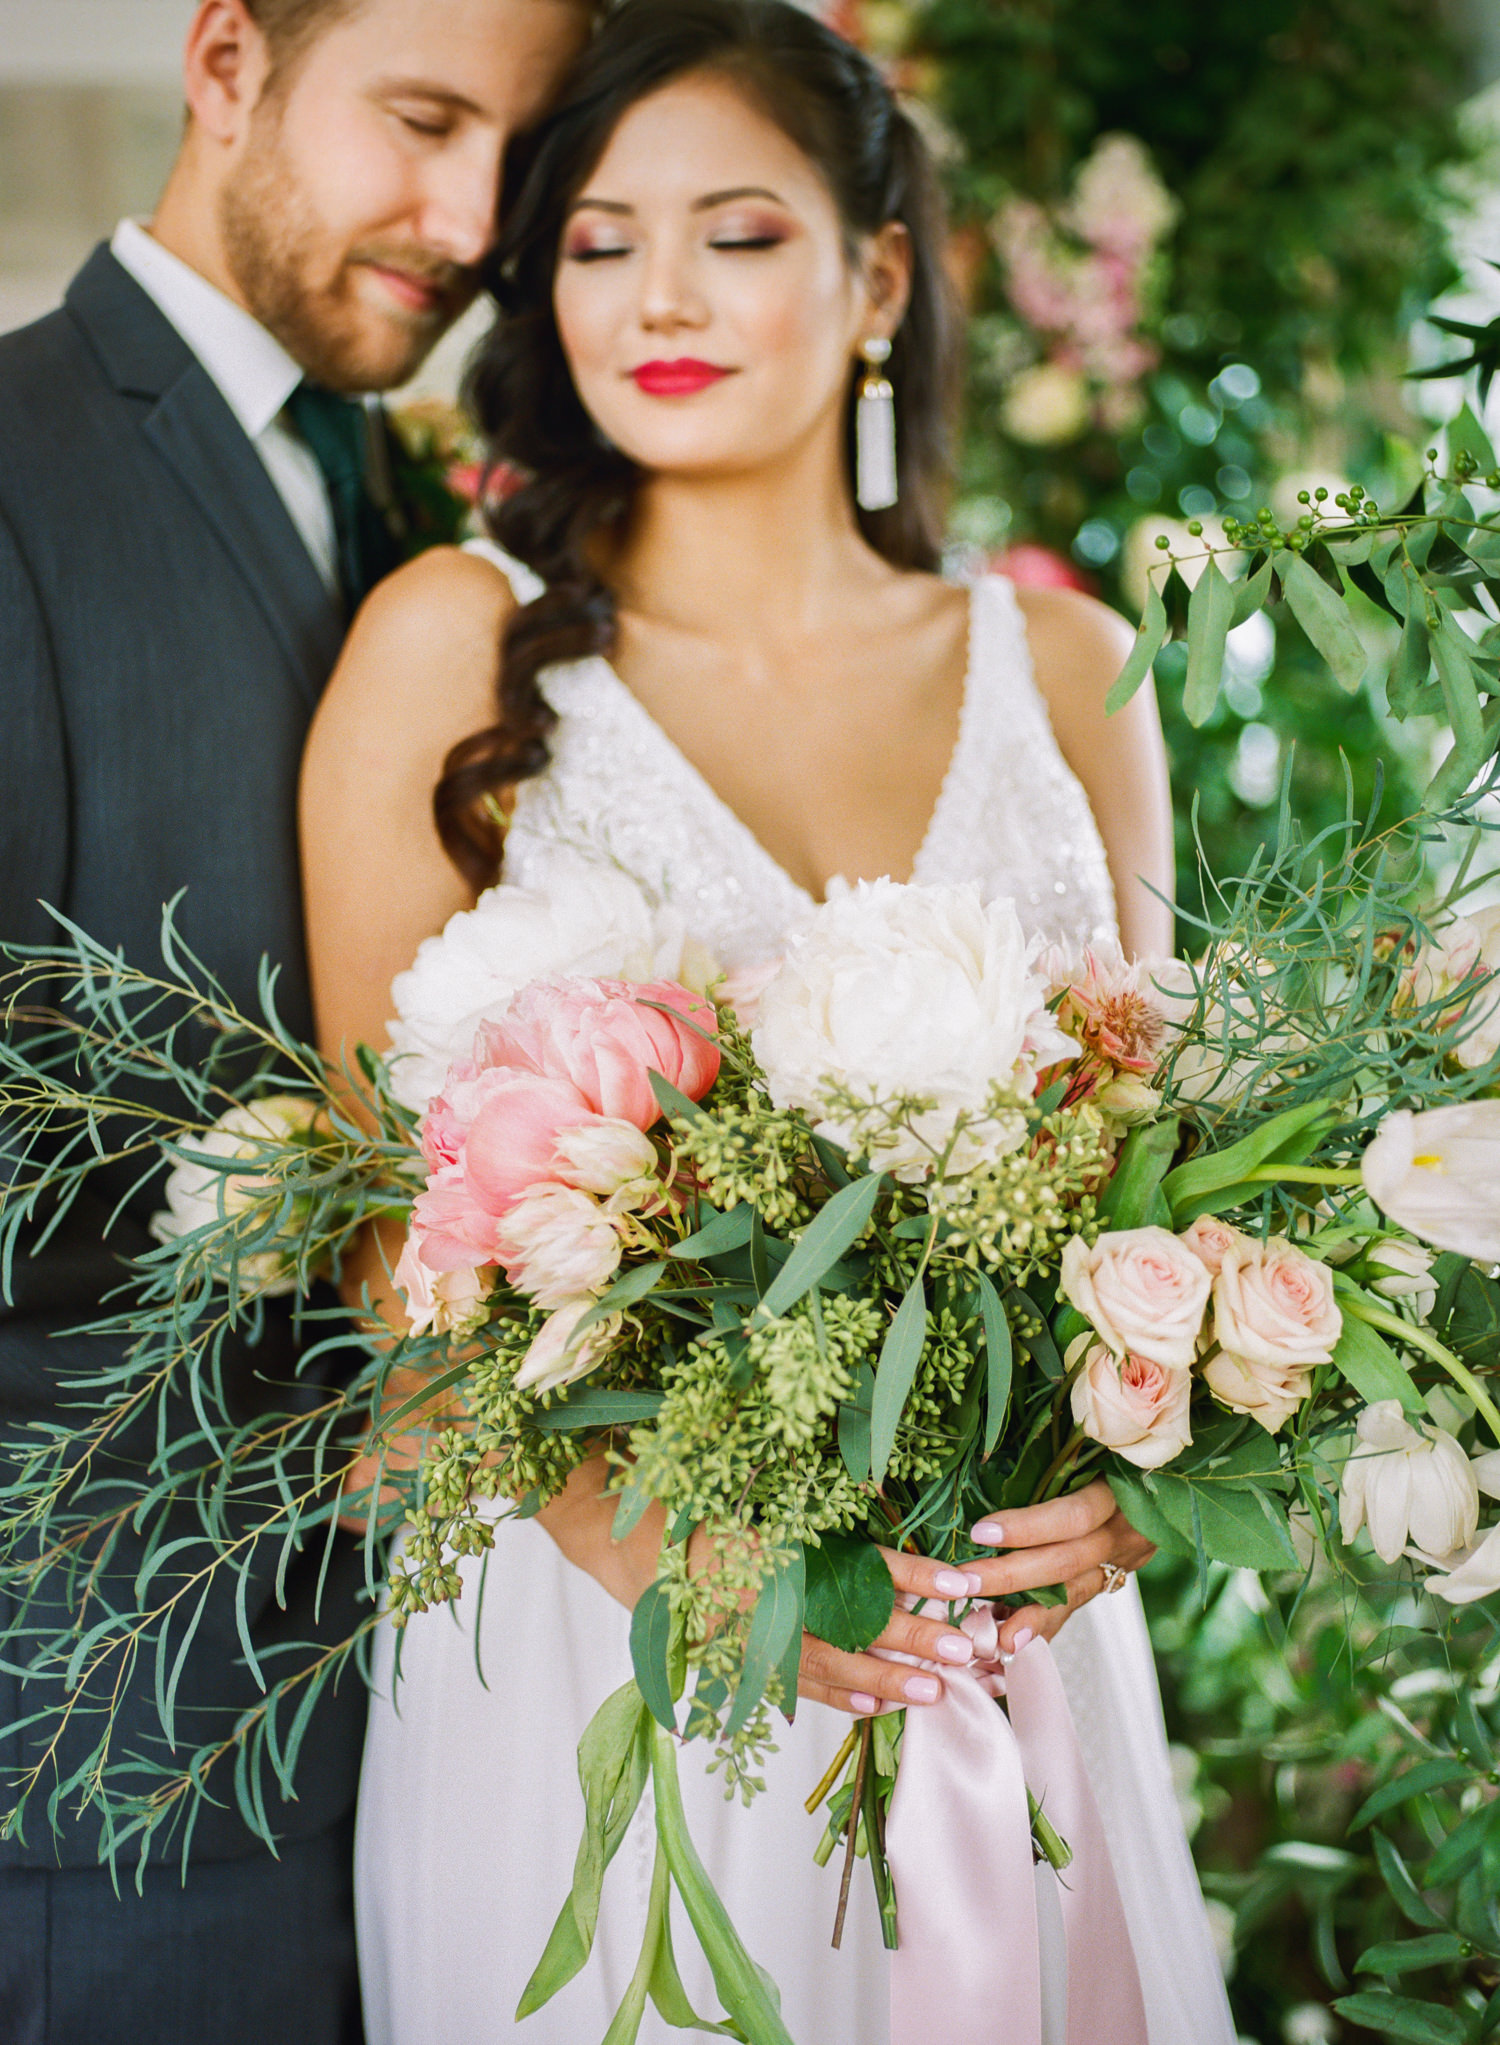 Pink floral bouquet and bride and groom; St. Louis wedding photographer Erica Robnett Photography